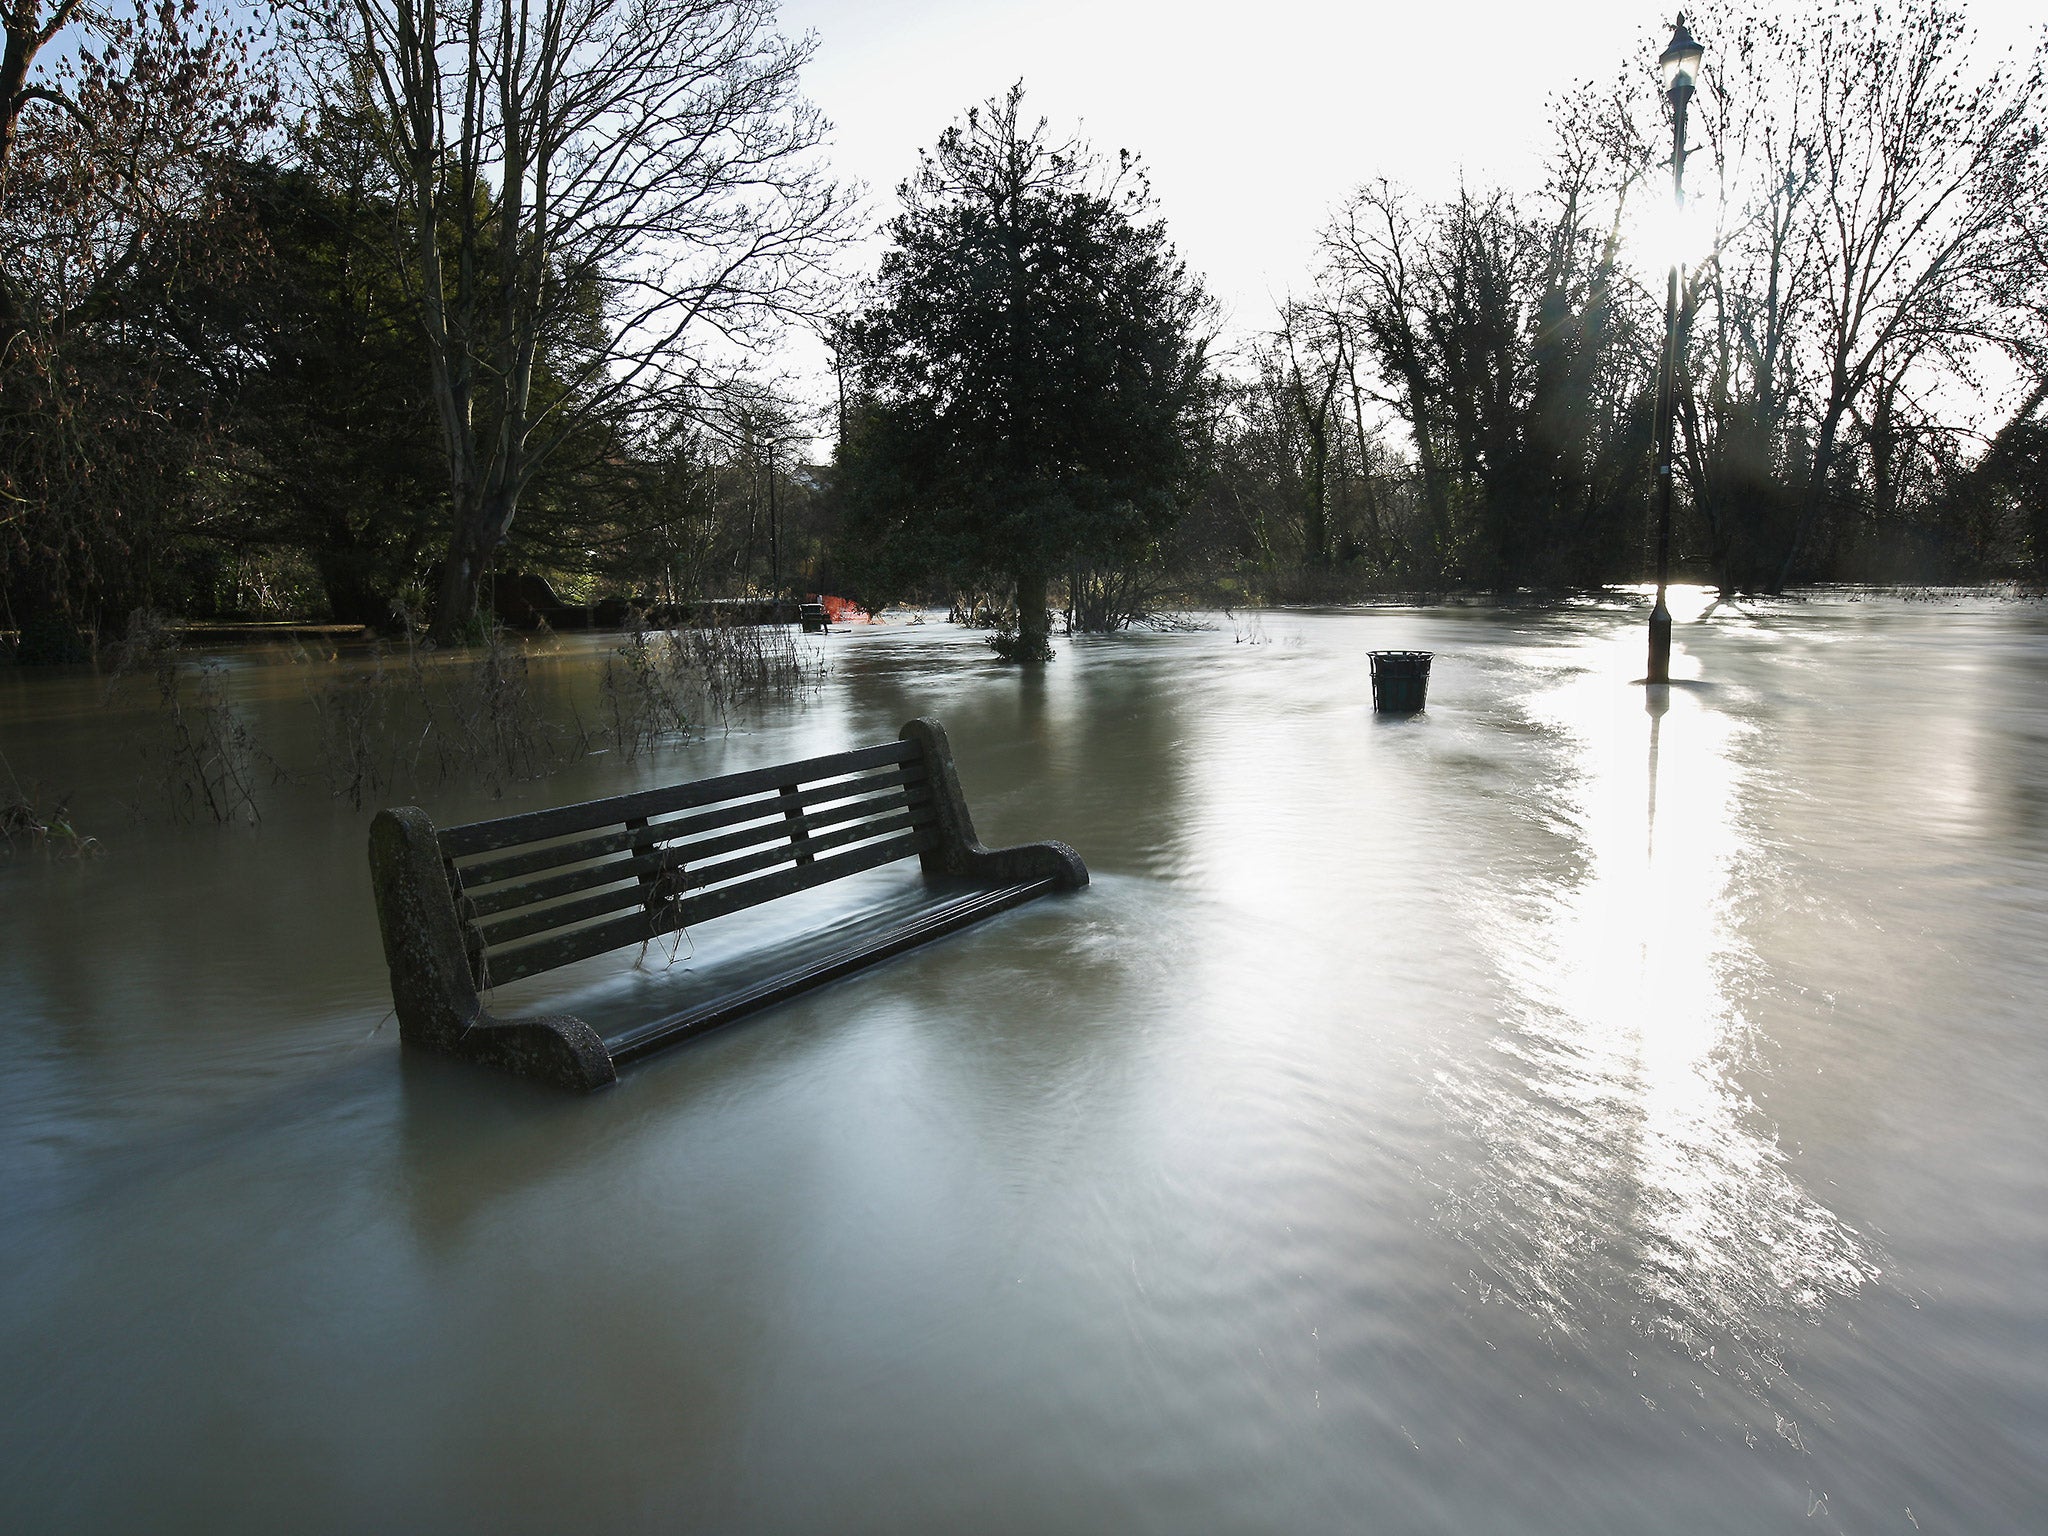 Severe flood warnings have been issued, Cumbria to be affected the most